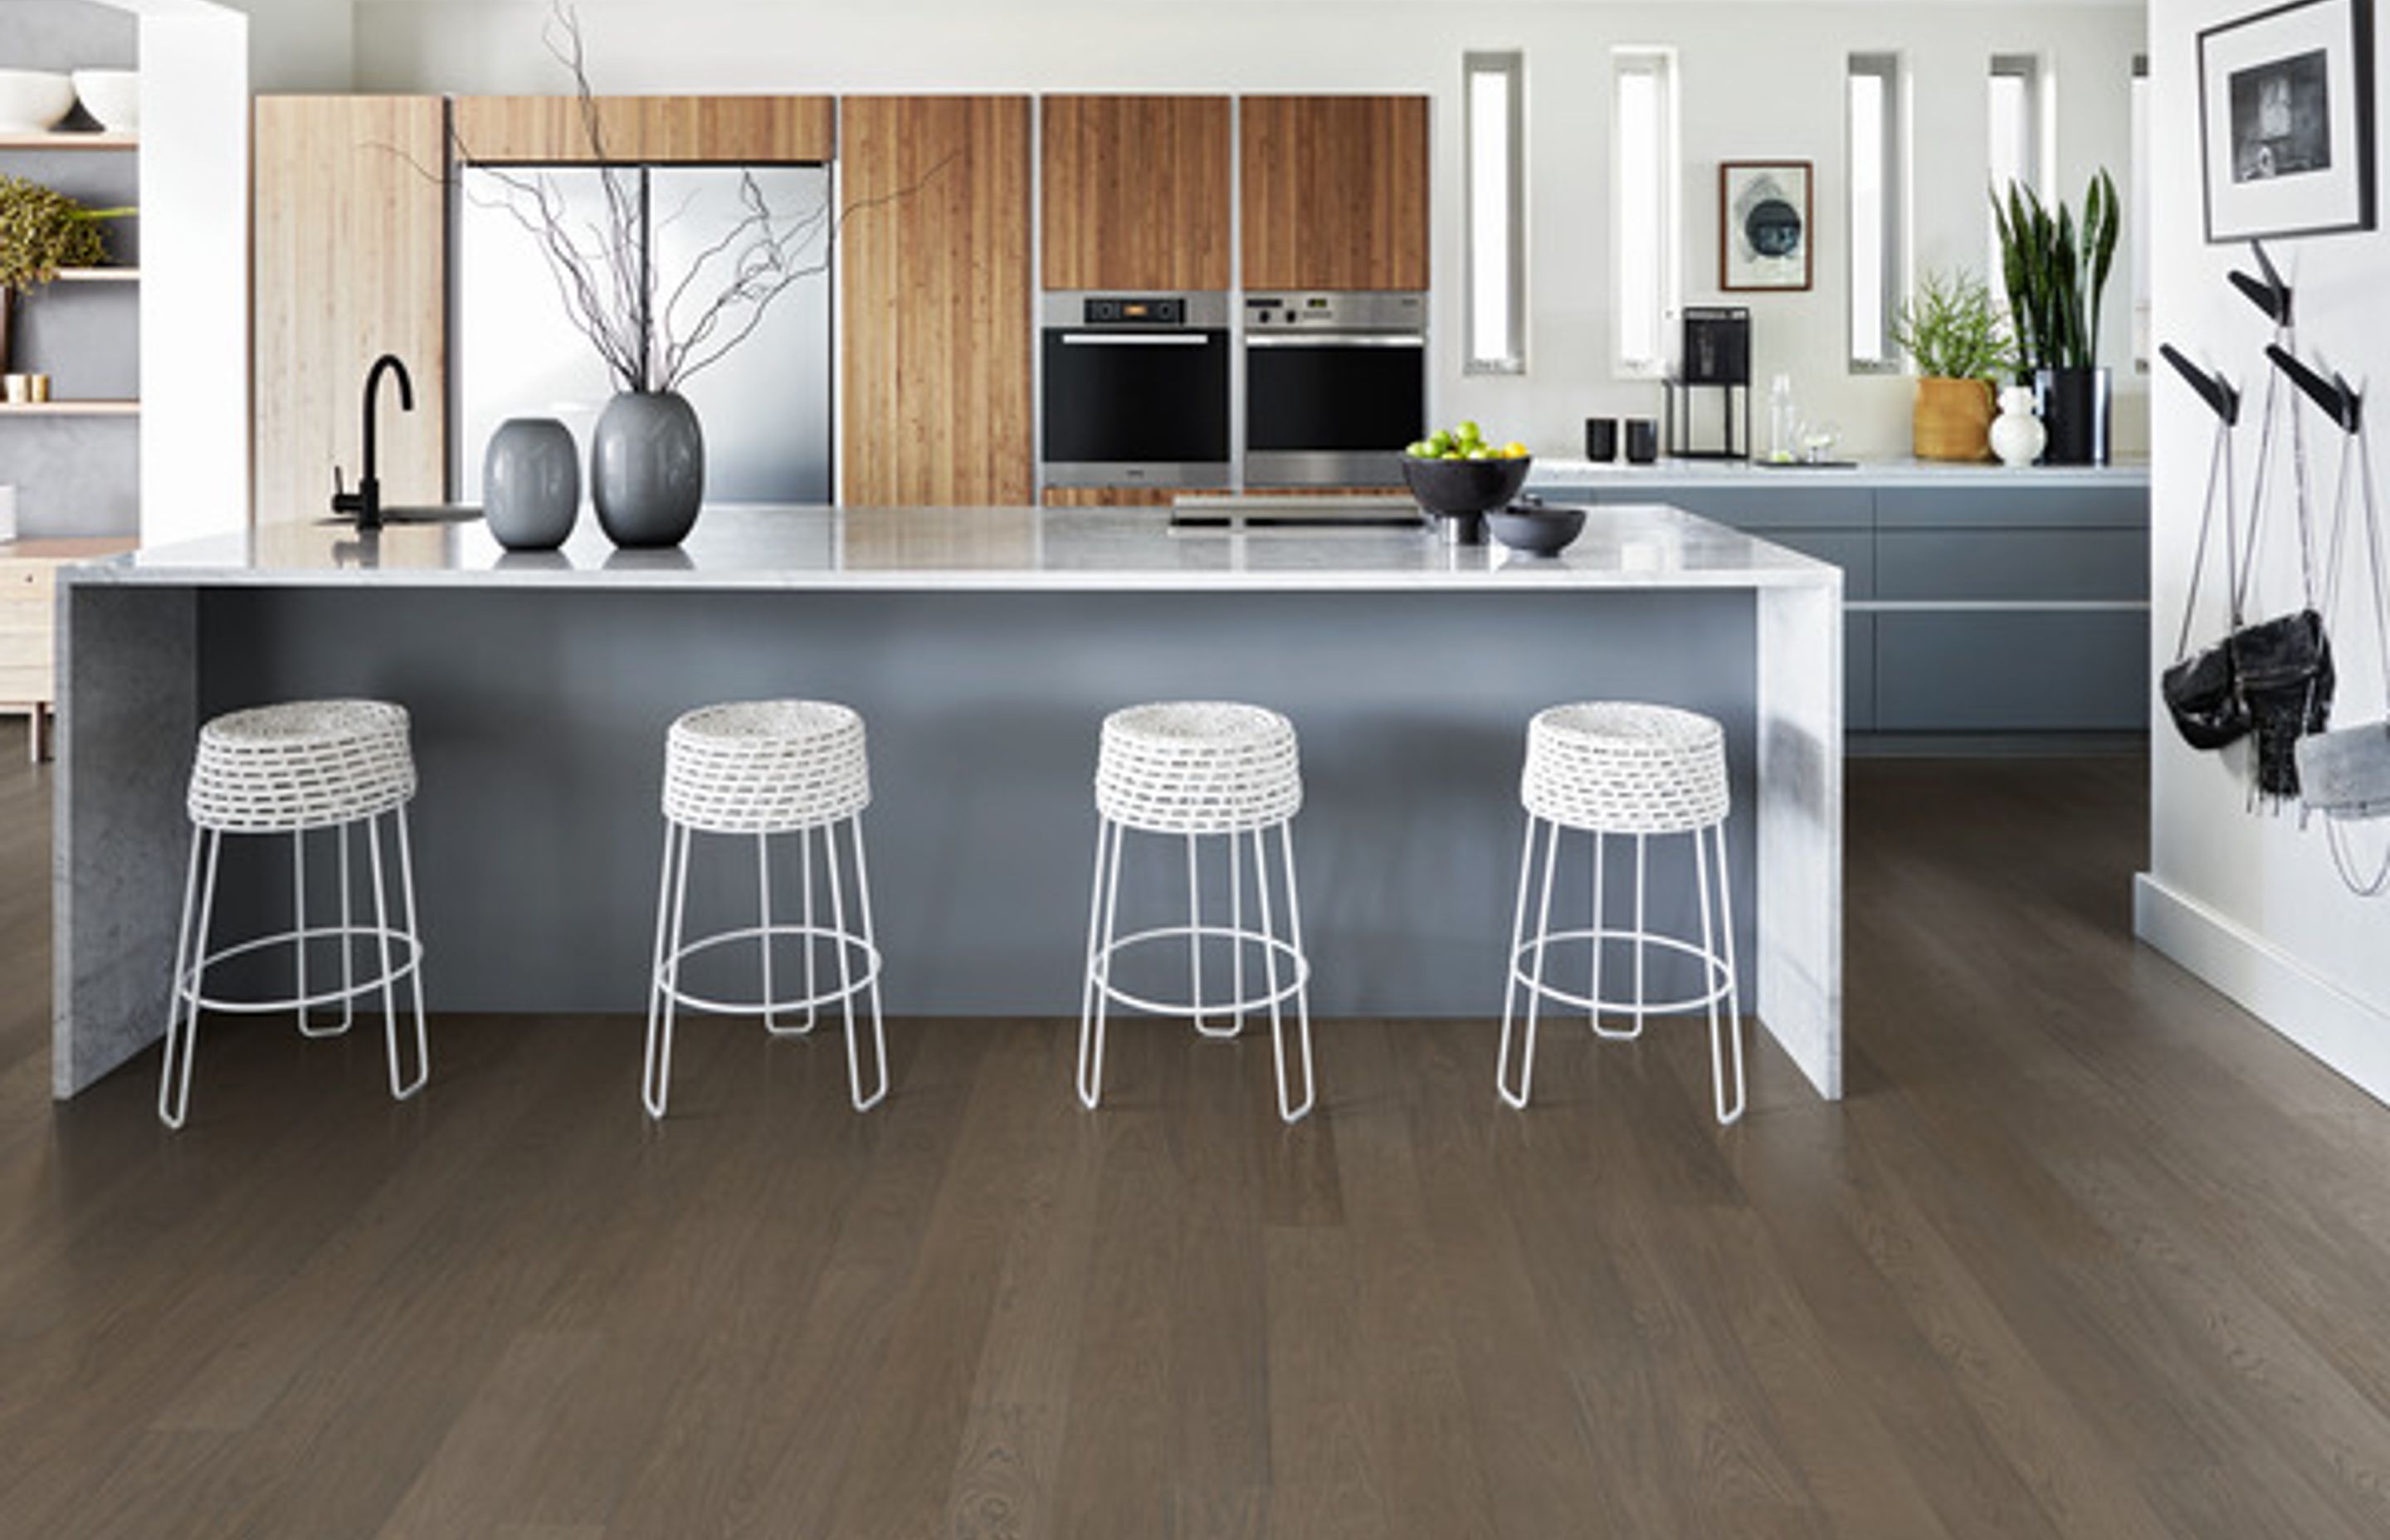 Faded Black Wide, from the Life Collection, is a single-strip stained oak floor with few knots and an authentic look and feel. The matt lacquer finish eliminates glare while protecting the wood from daily wear.